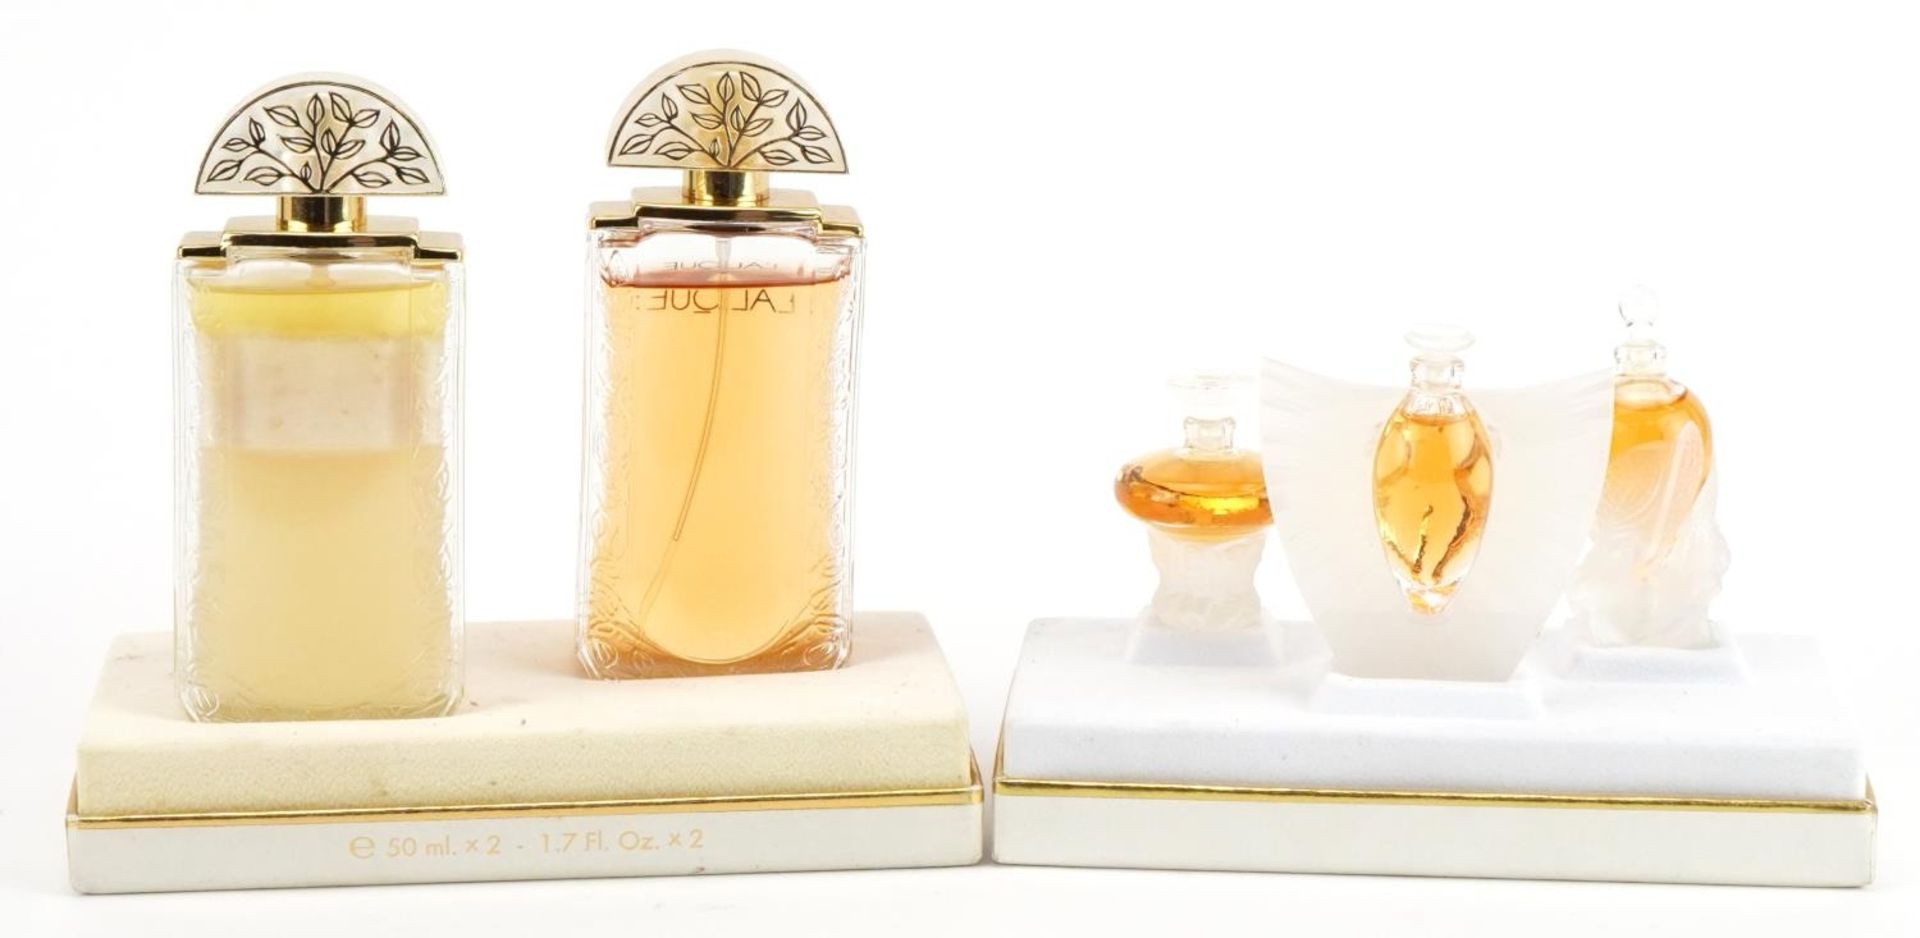 Two Lalique scent or perfume bottle sets with boxes comprising Coffret Découverte Discovery set - Image 3 of 3